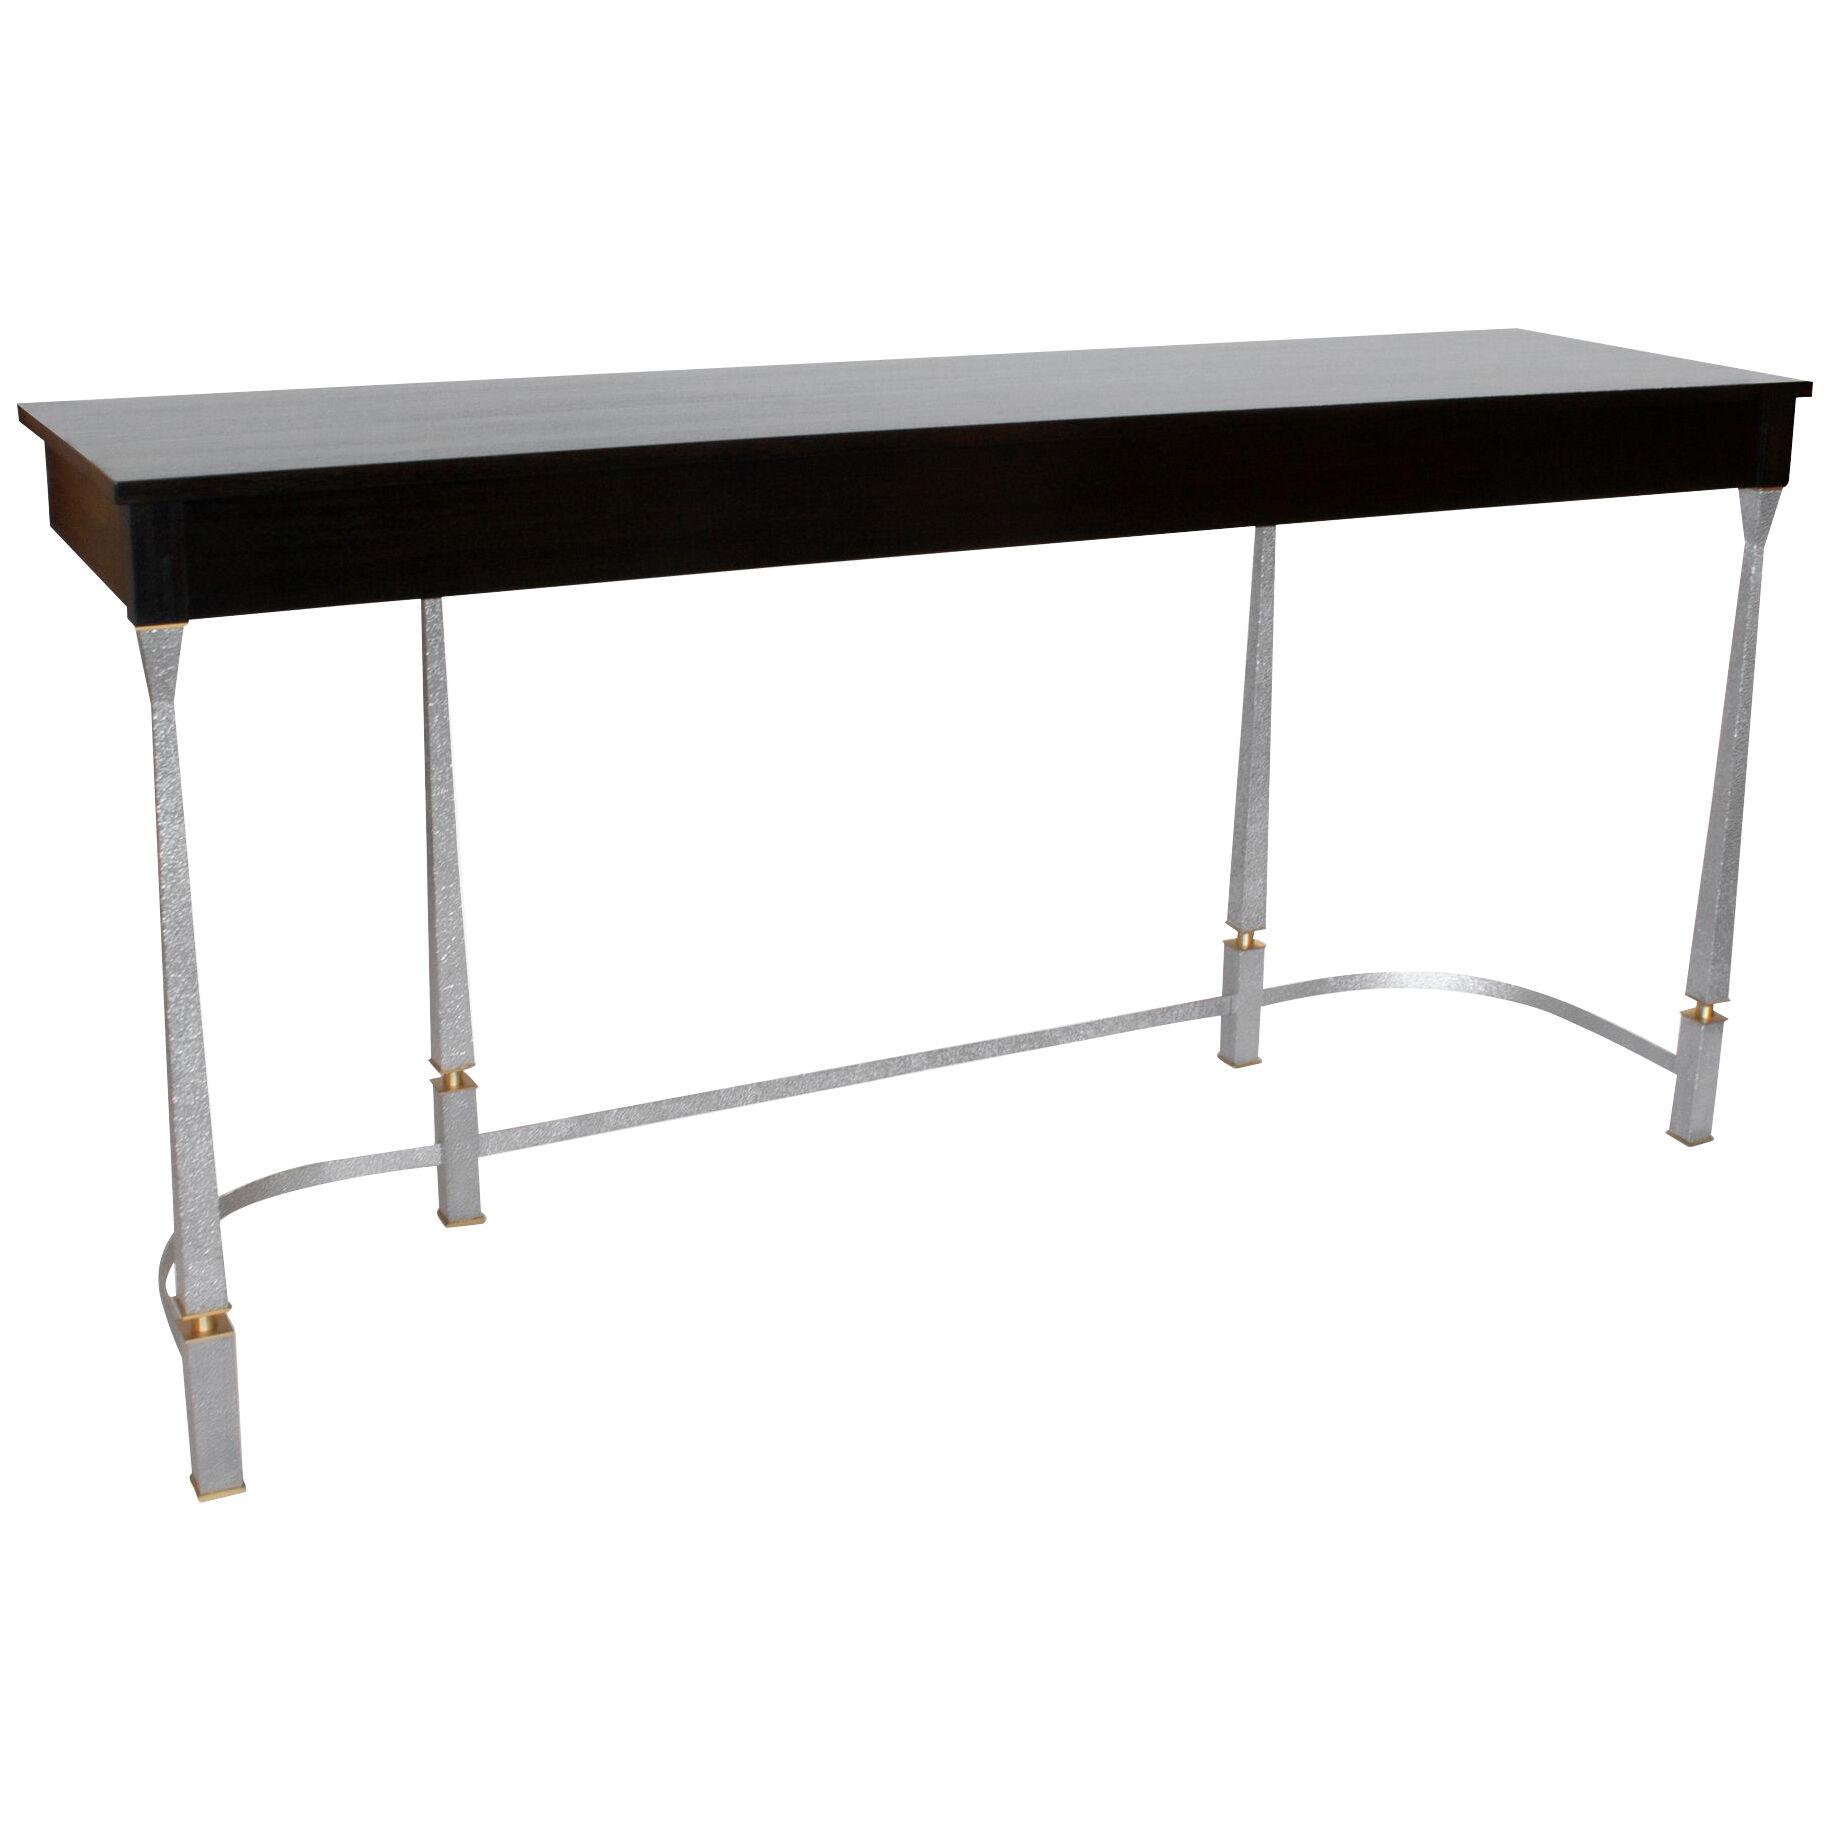 A freestanding Modernist Console Table by ILIAD Design